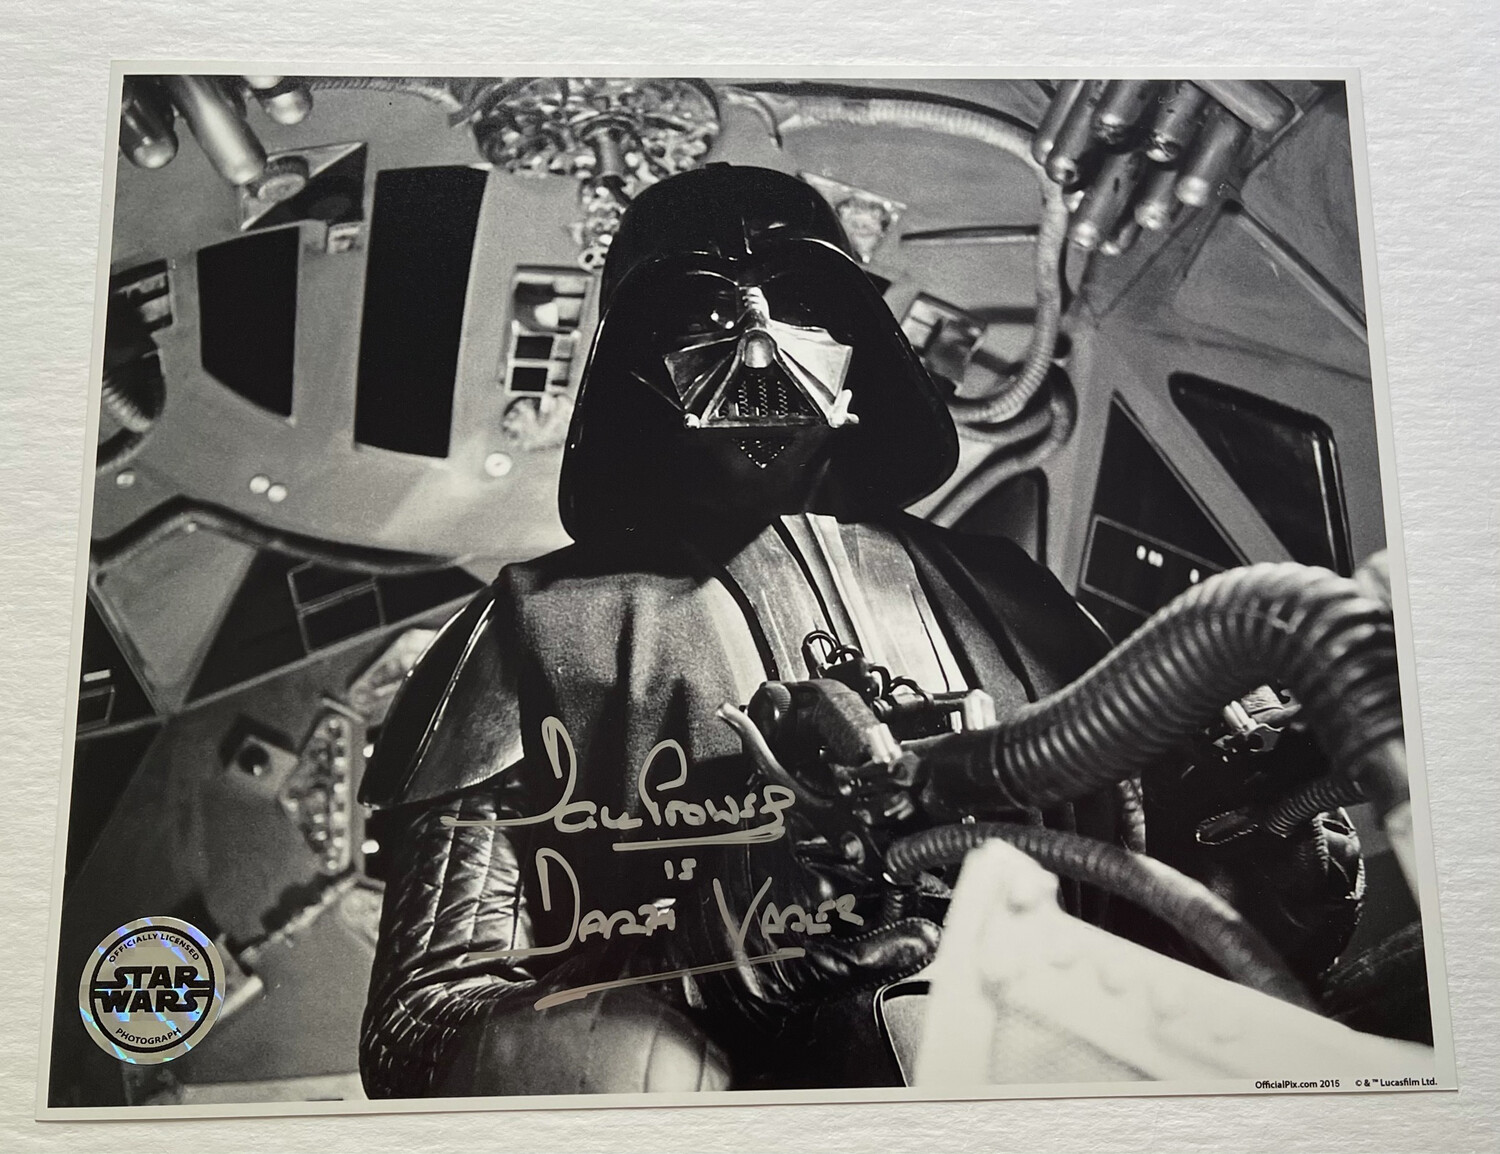 8X10 DARTH VADER PHOTO SIGNED BY DAVE PROWSE